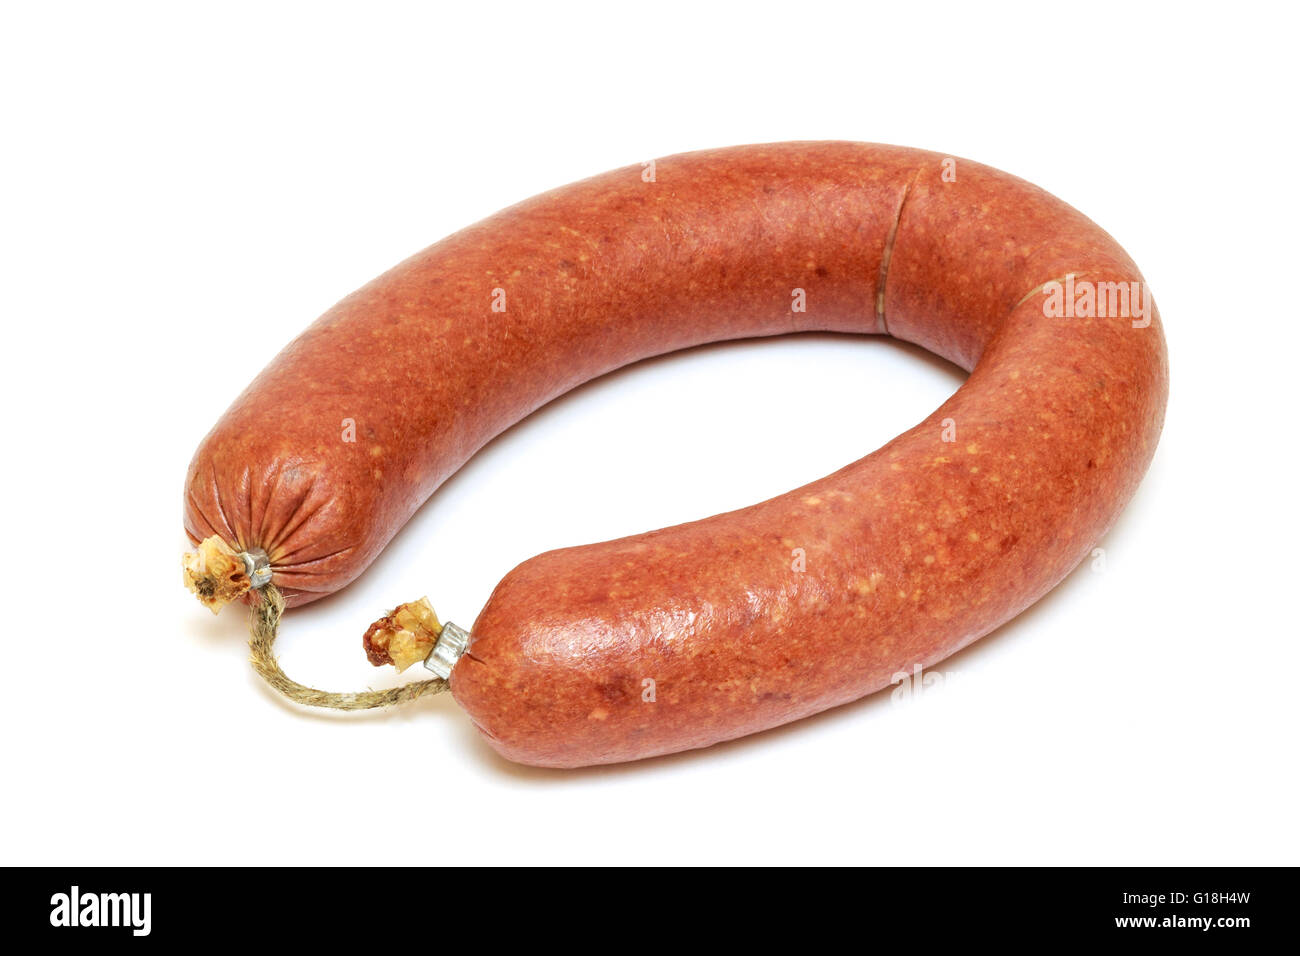 Beef sausage isolated on white background Stock Photo